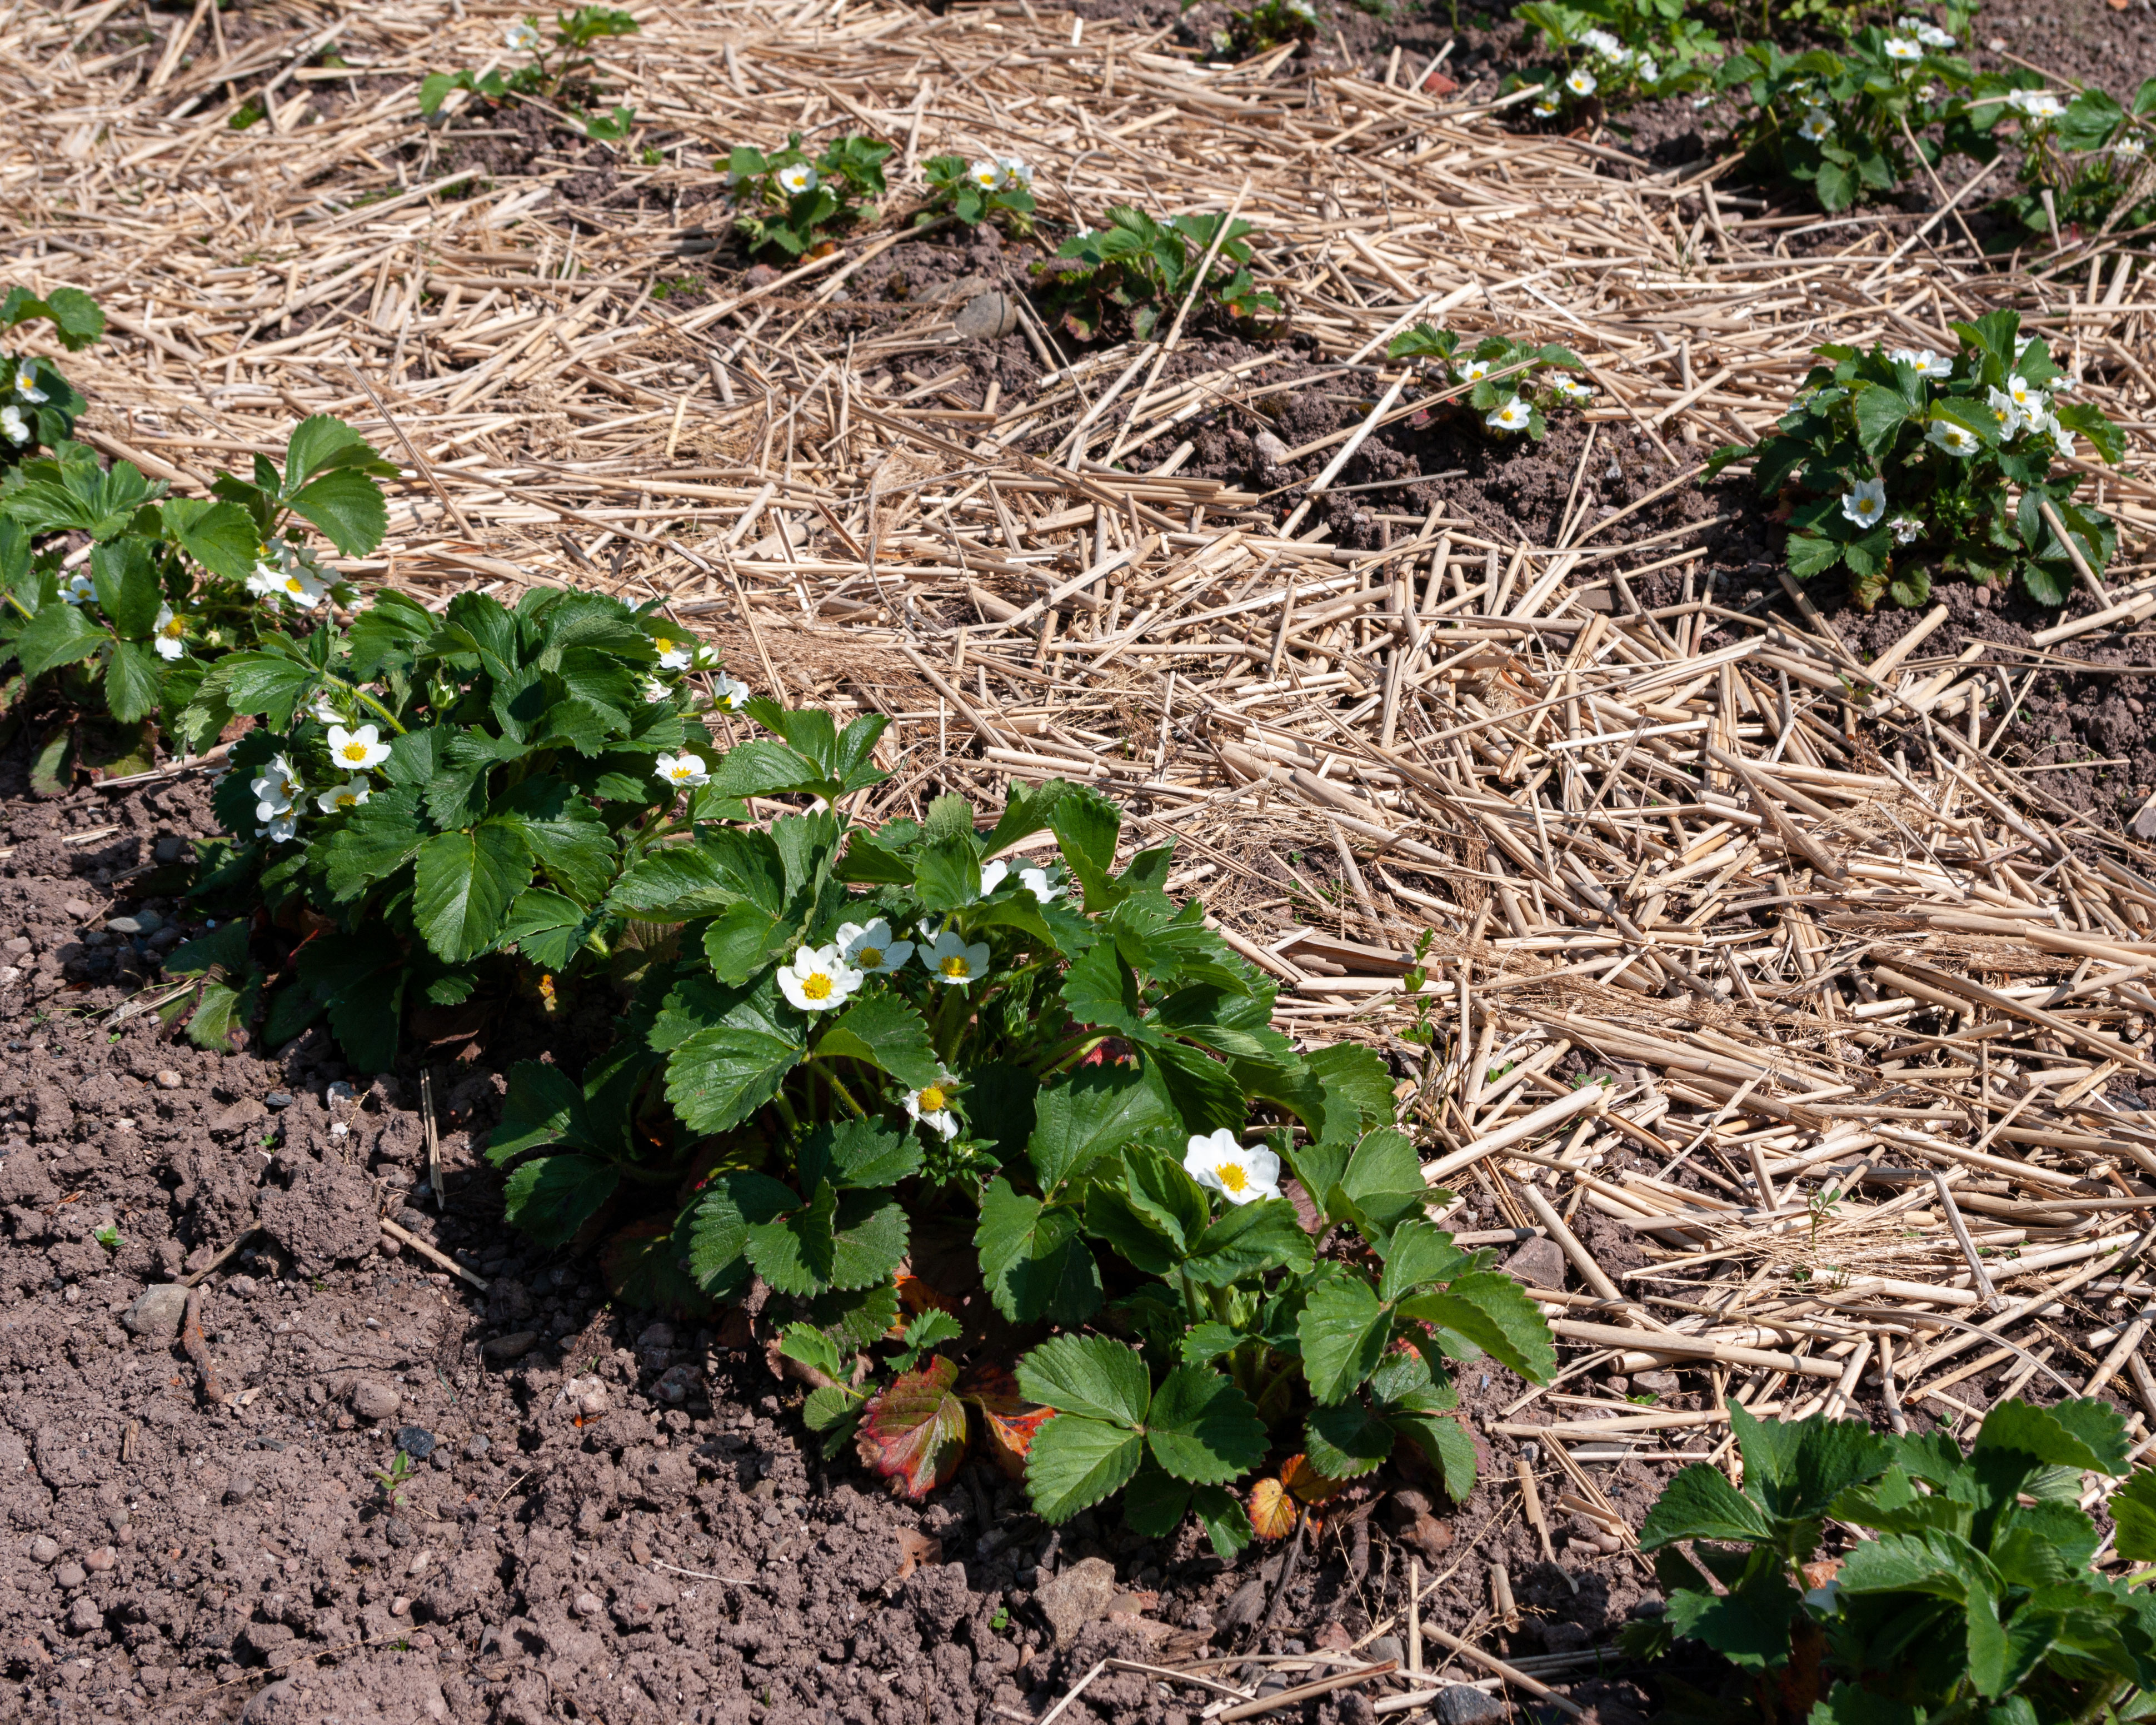 Strawberry companion plants: what to grow with strawberries